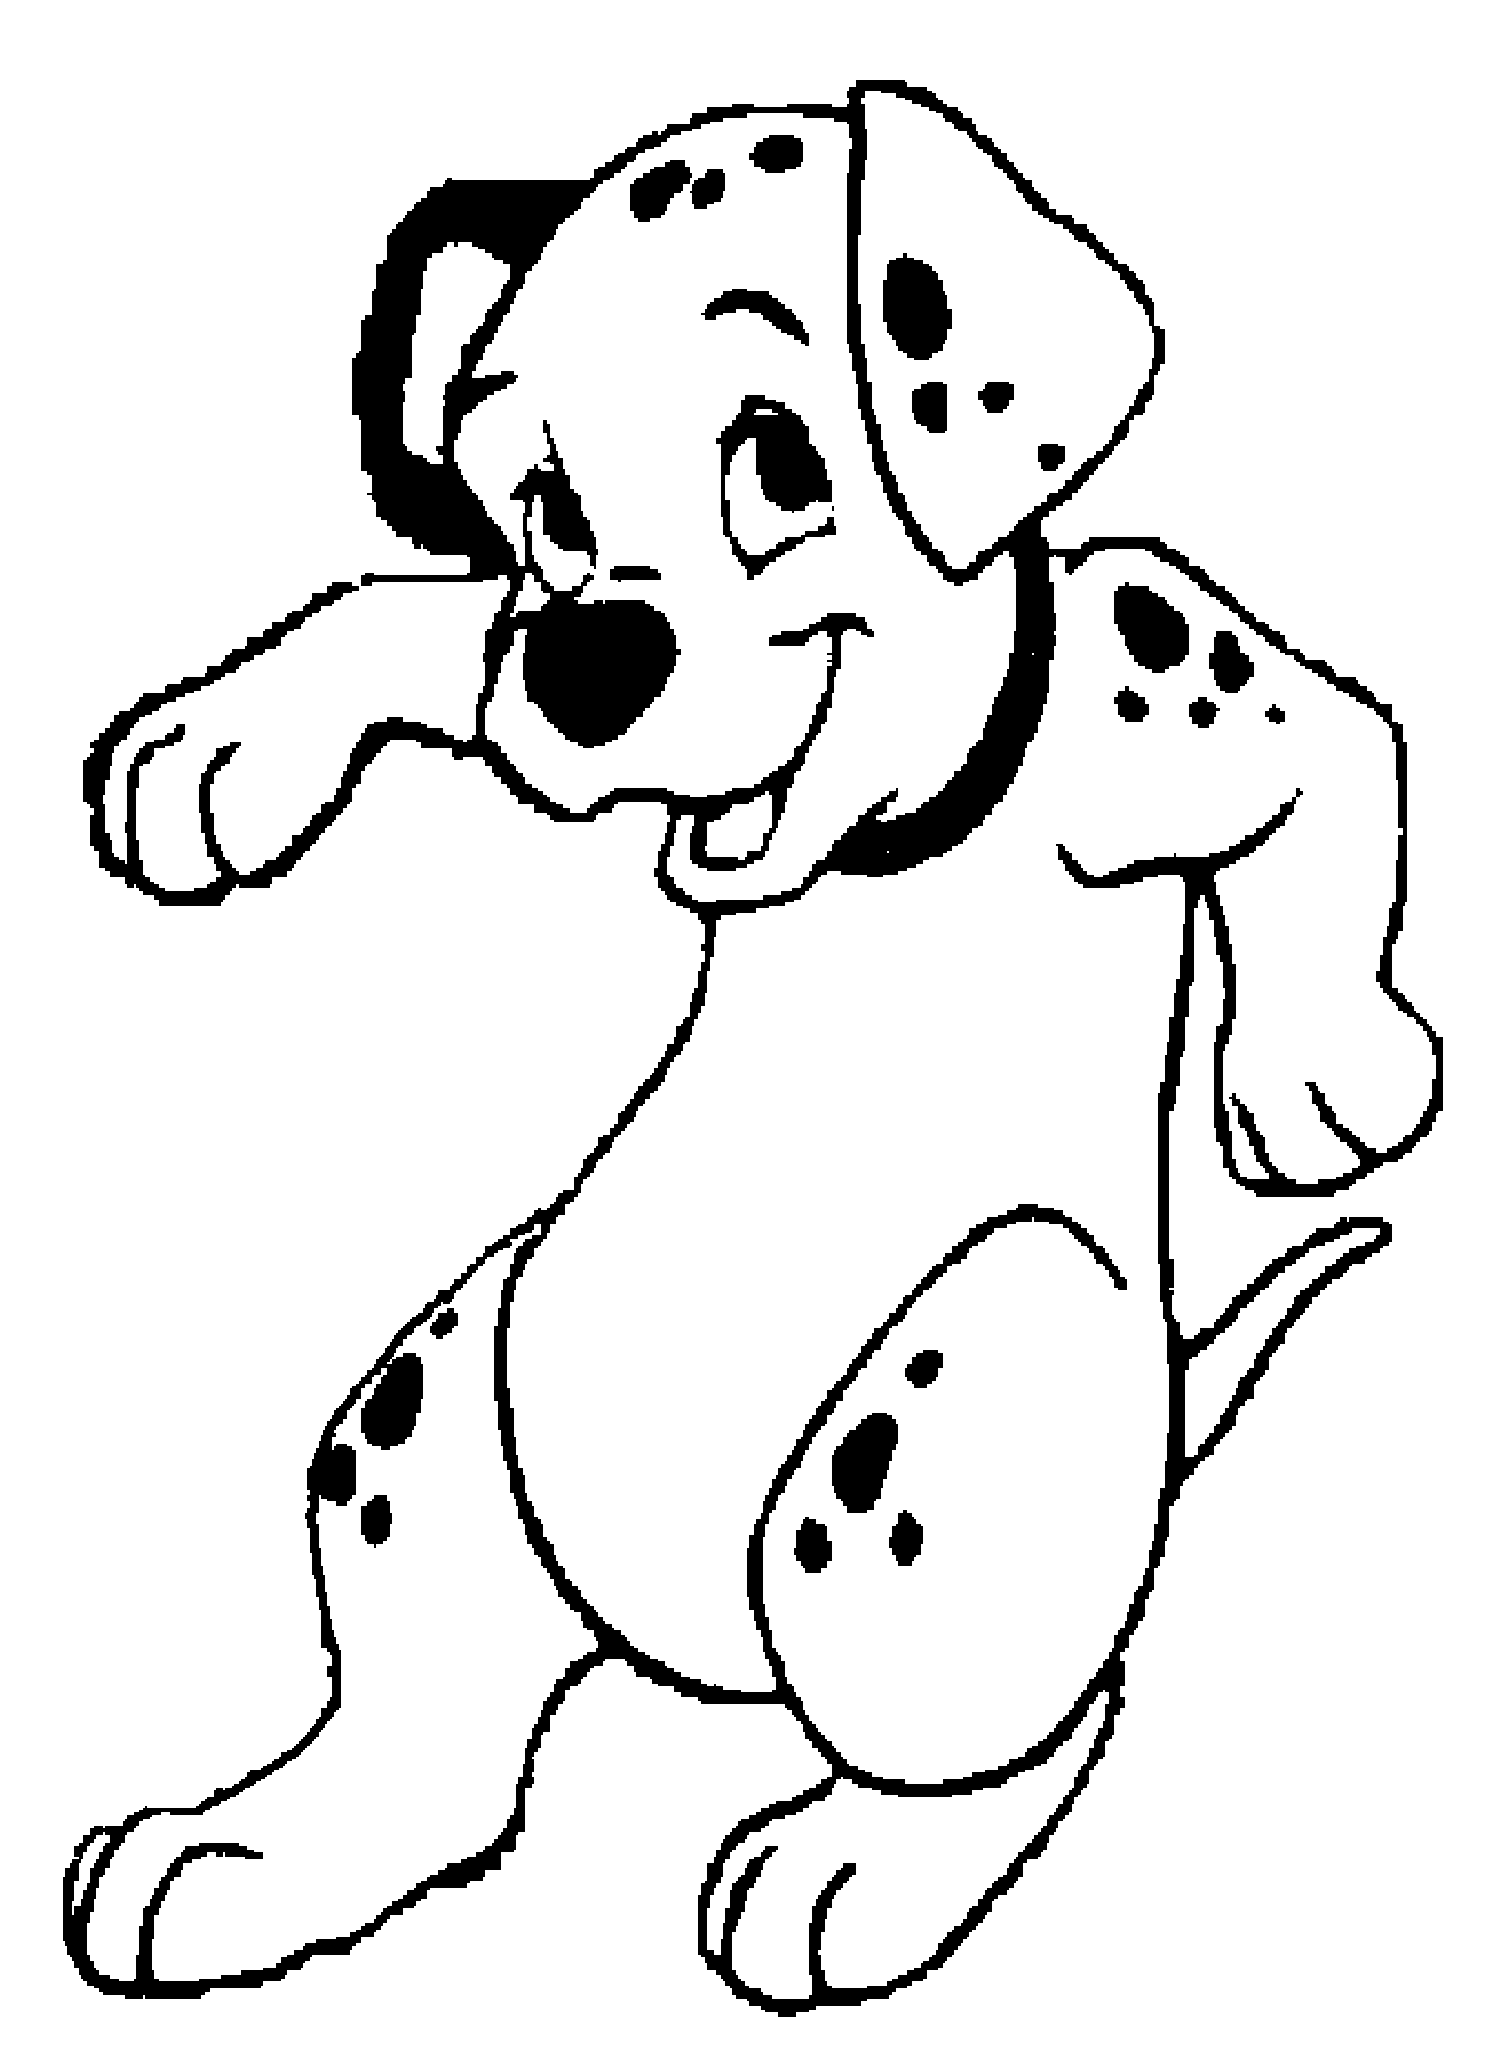 Drawing of The 101 Dalmatians to print and color